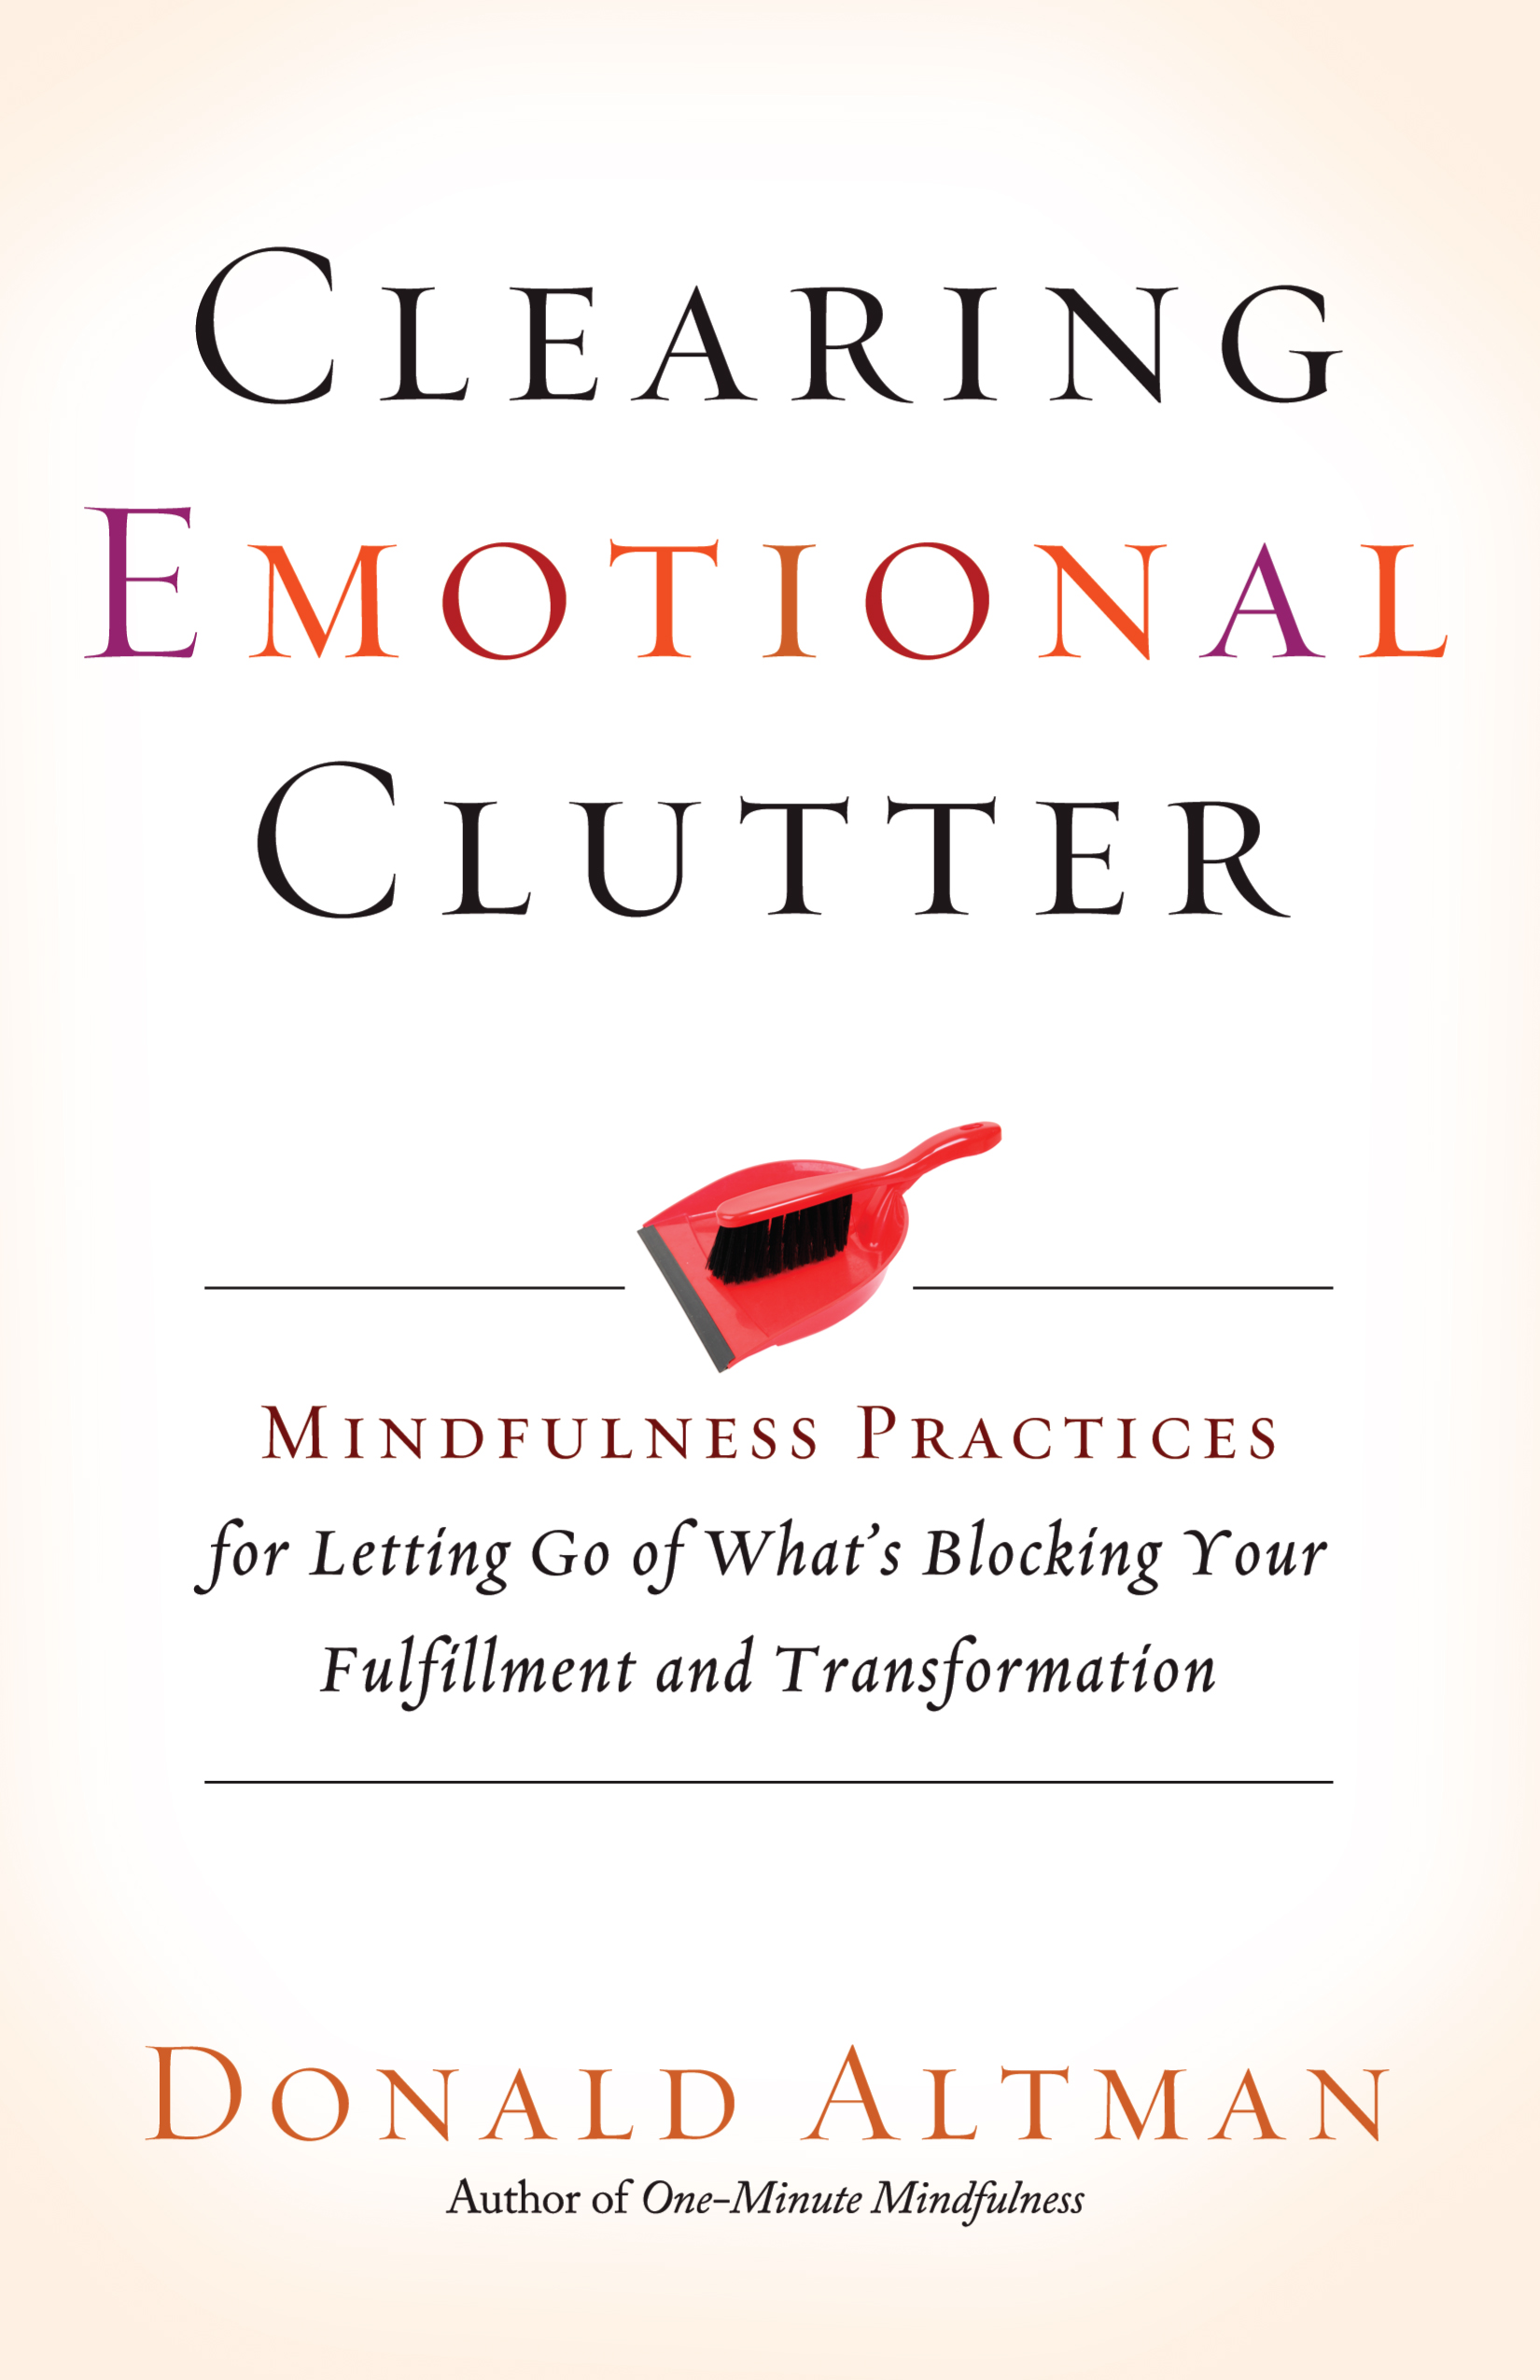 Image de couverture de Clearing Emotional Clutter [electronic resource] : Mindfulness Practices for Letting Go of What's Blocking Your Fulfillment and Transformation